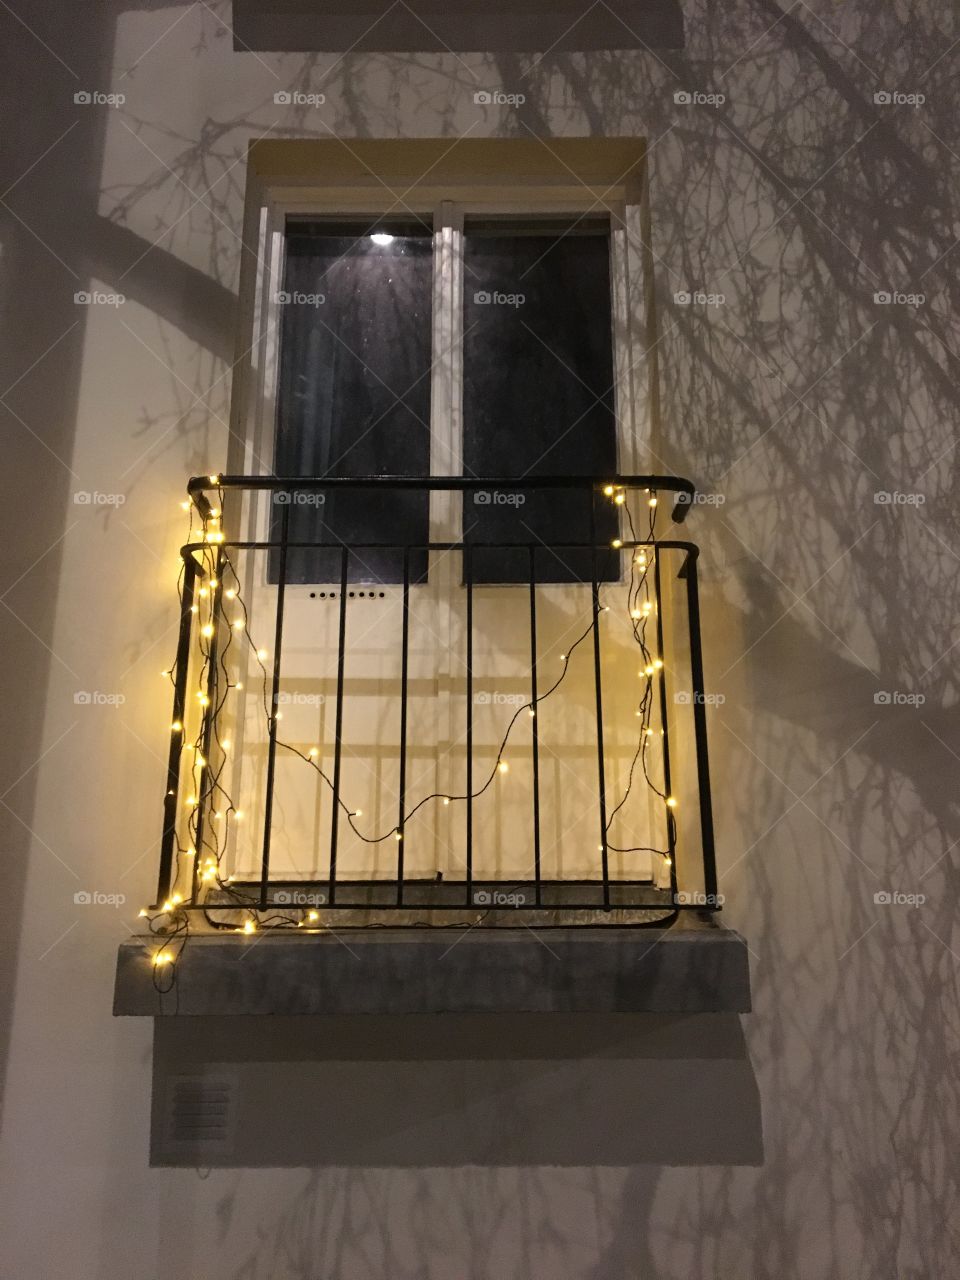 French balcony and lights